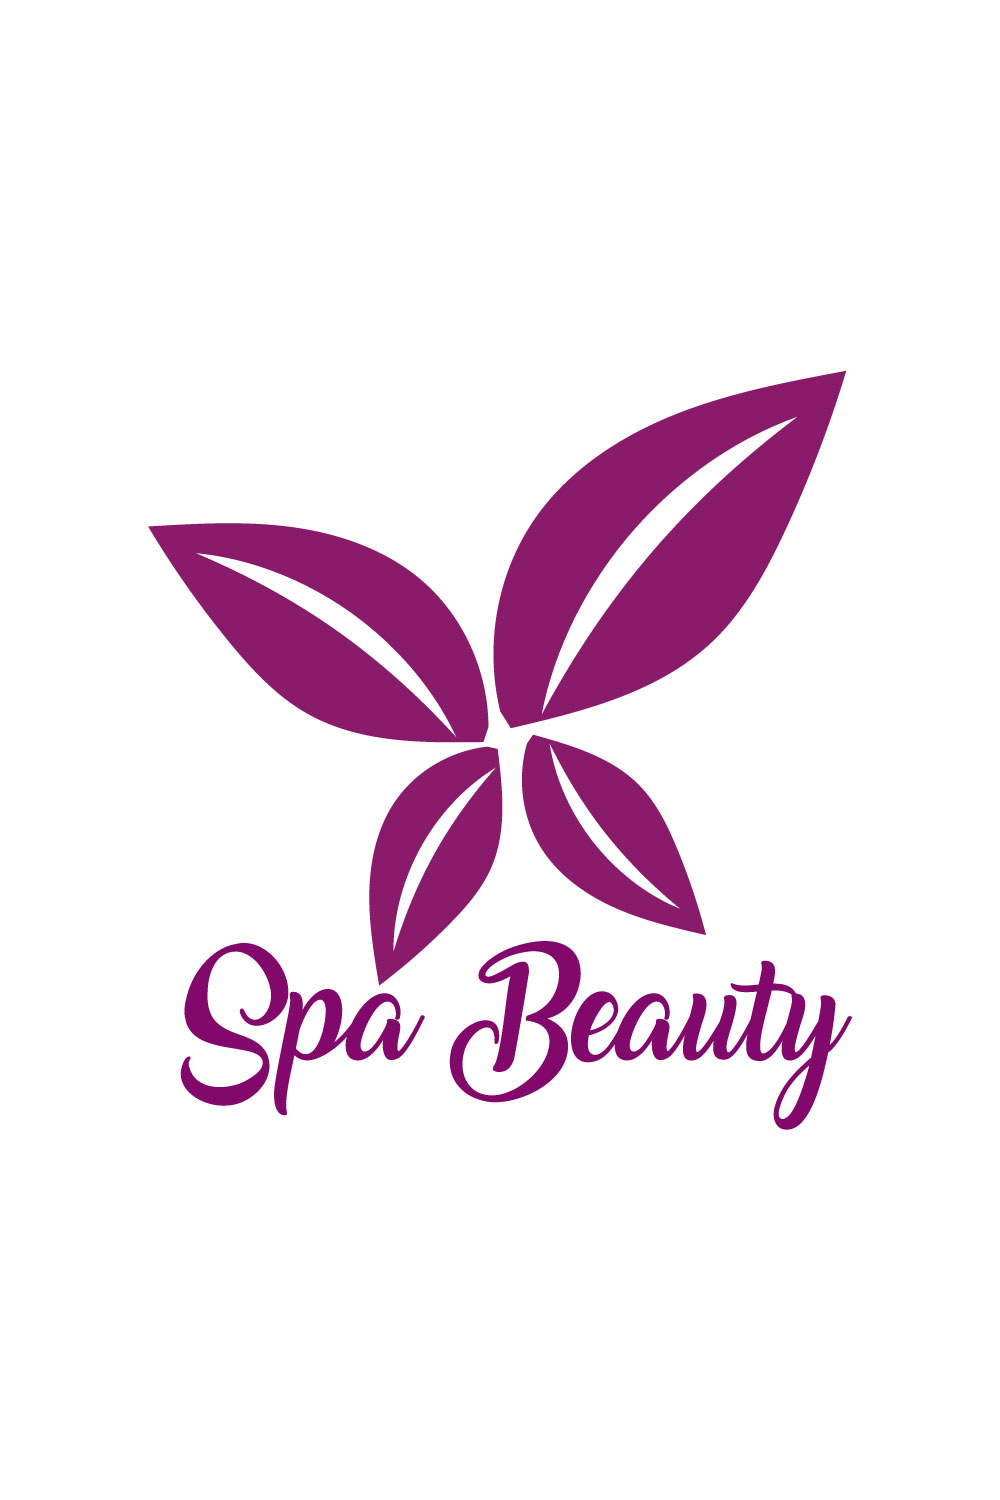 Free Healthy skin care logo pinterest preview image.